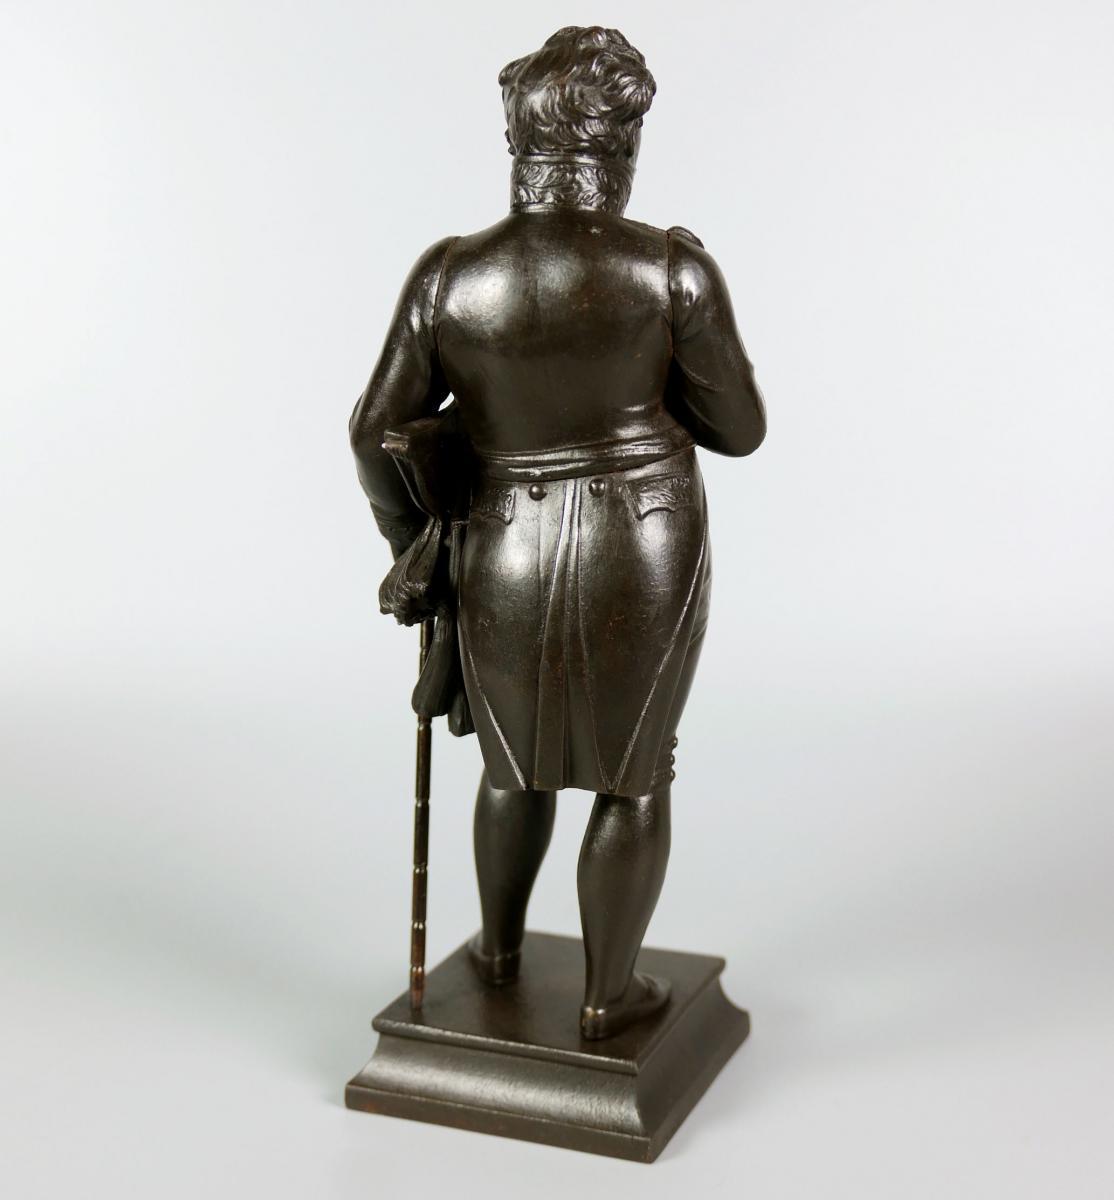 A Berlin Ironware Figure of The Prince Regent